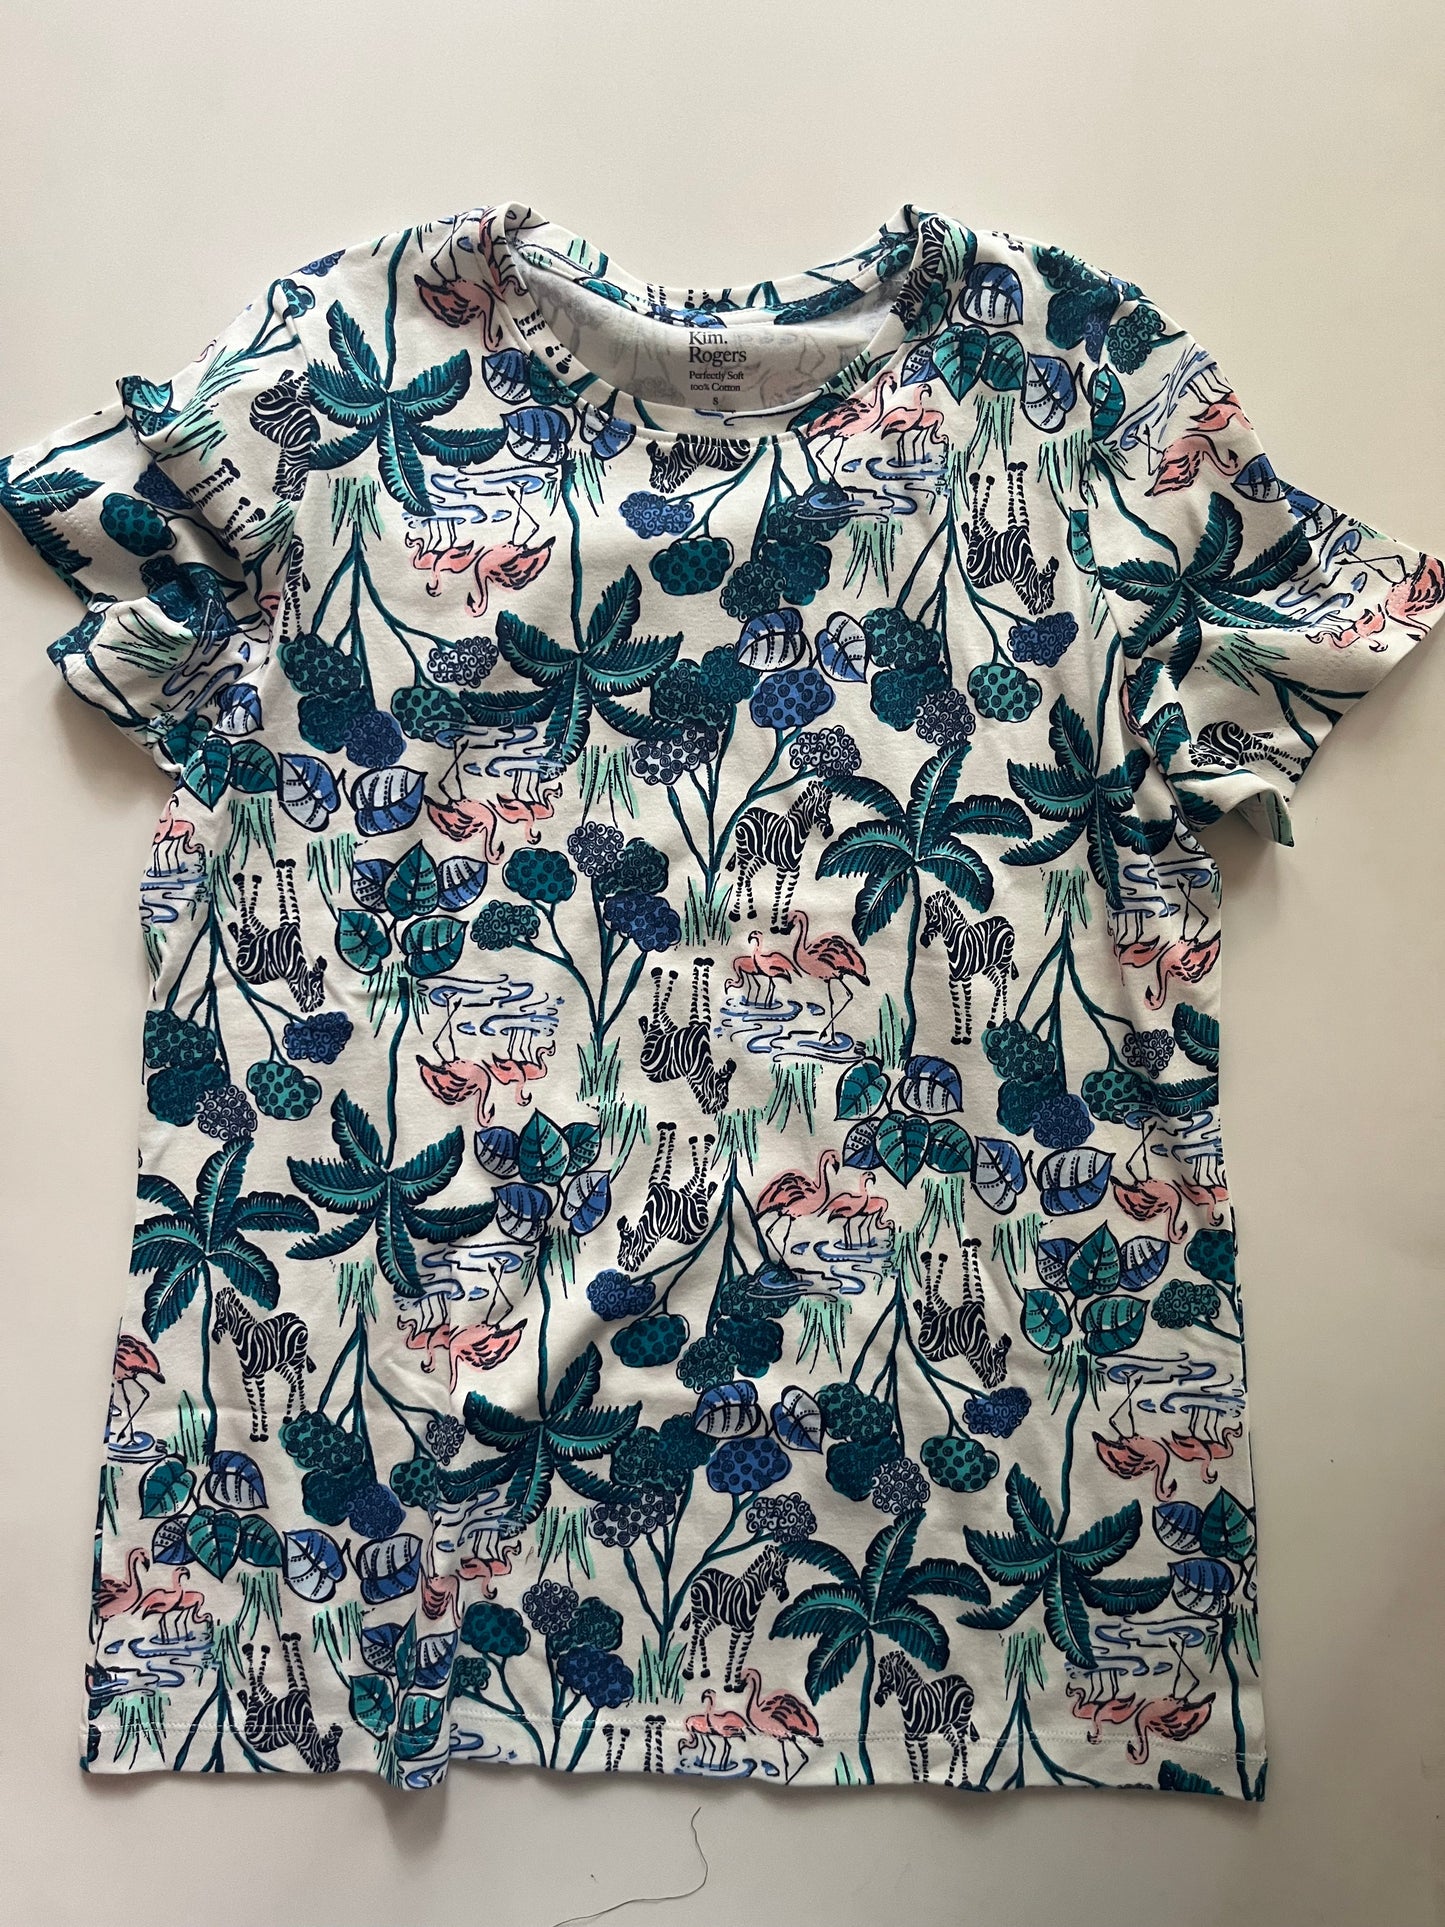 Floral Top Short Sleeve Kim Rogers, Size S